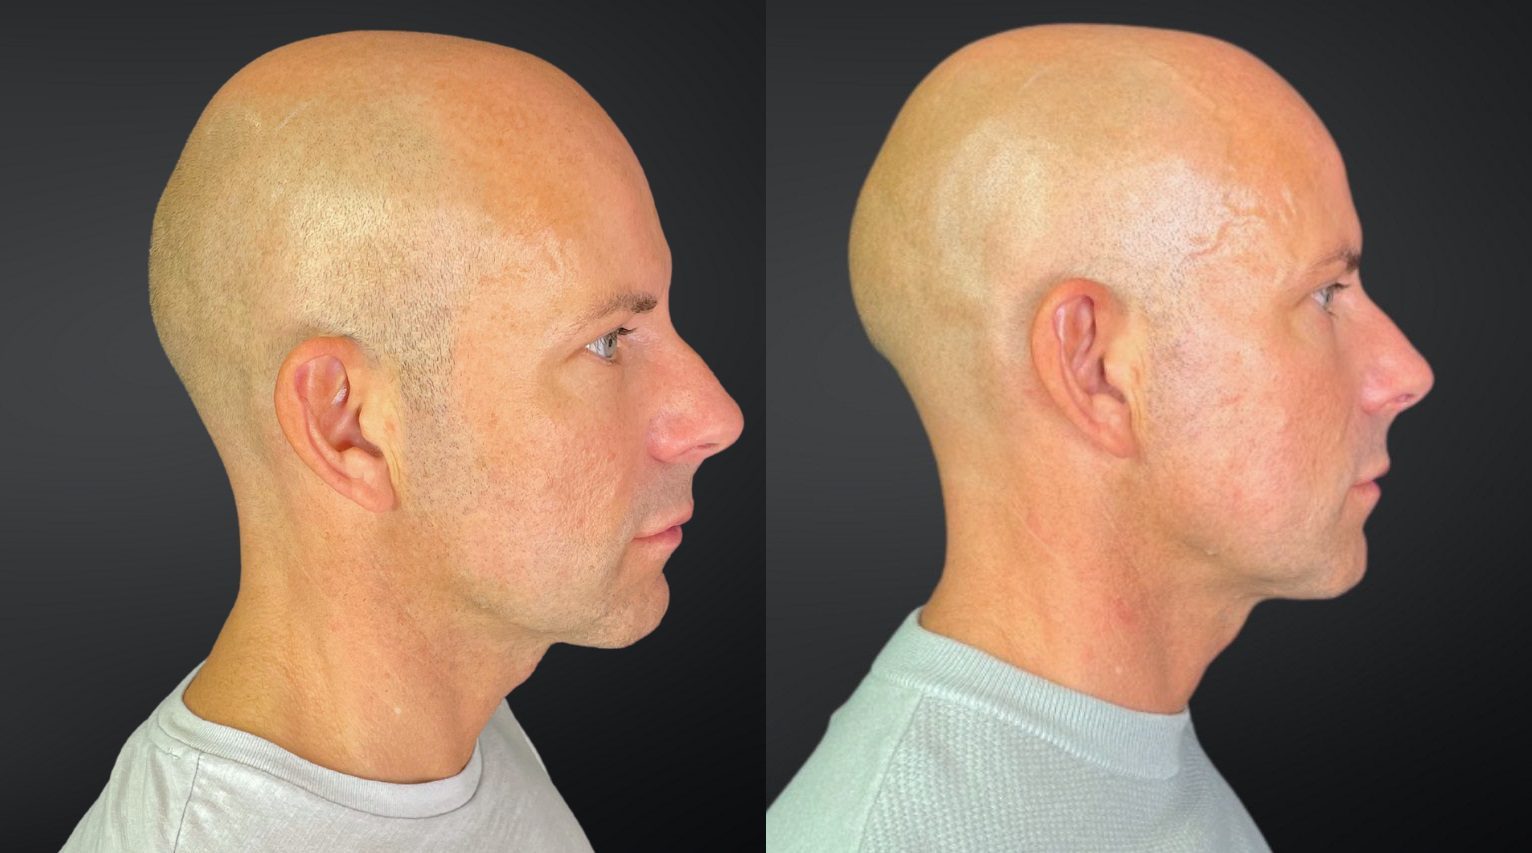 dermal fillers lower face lift on male patient before and after